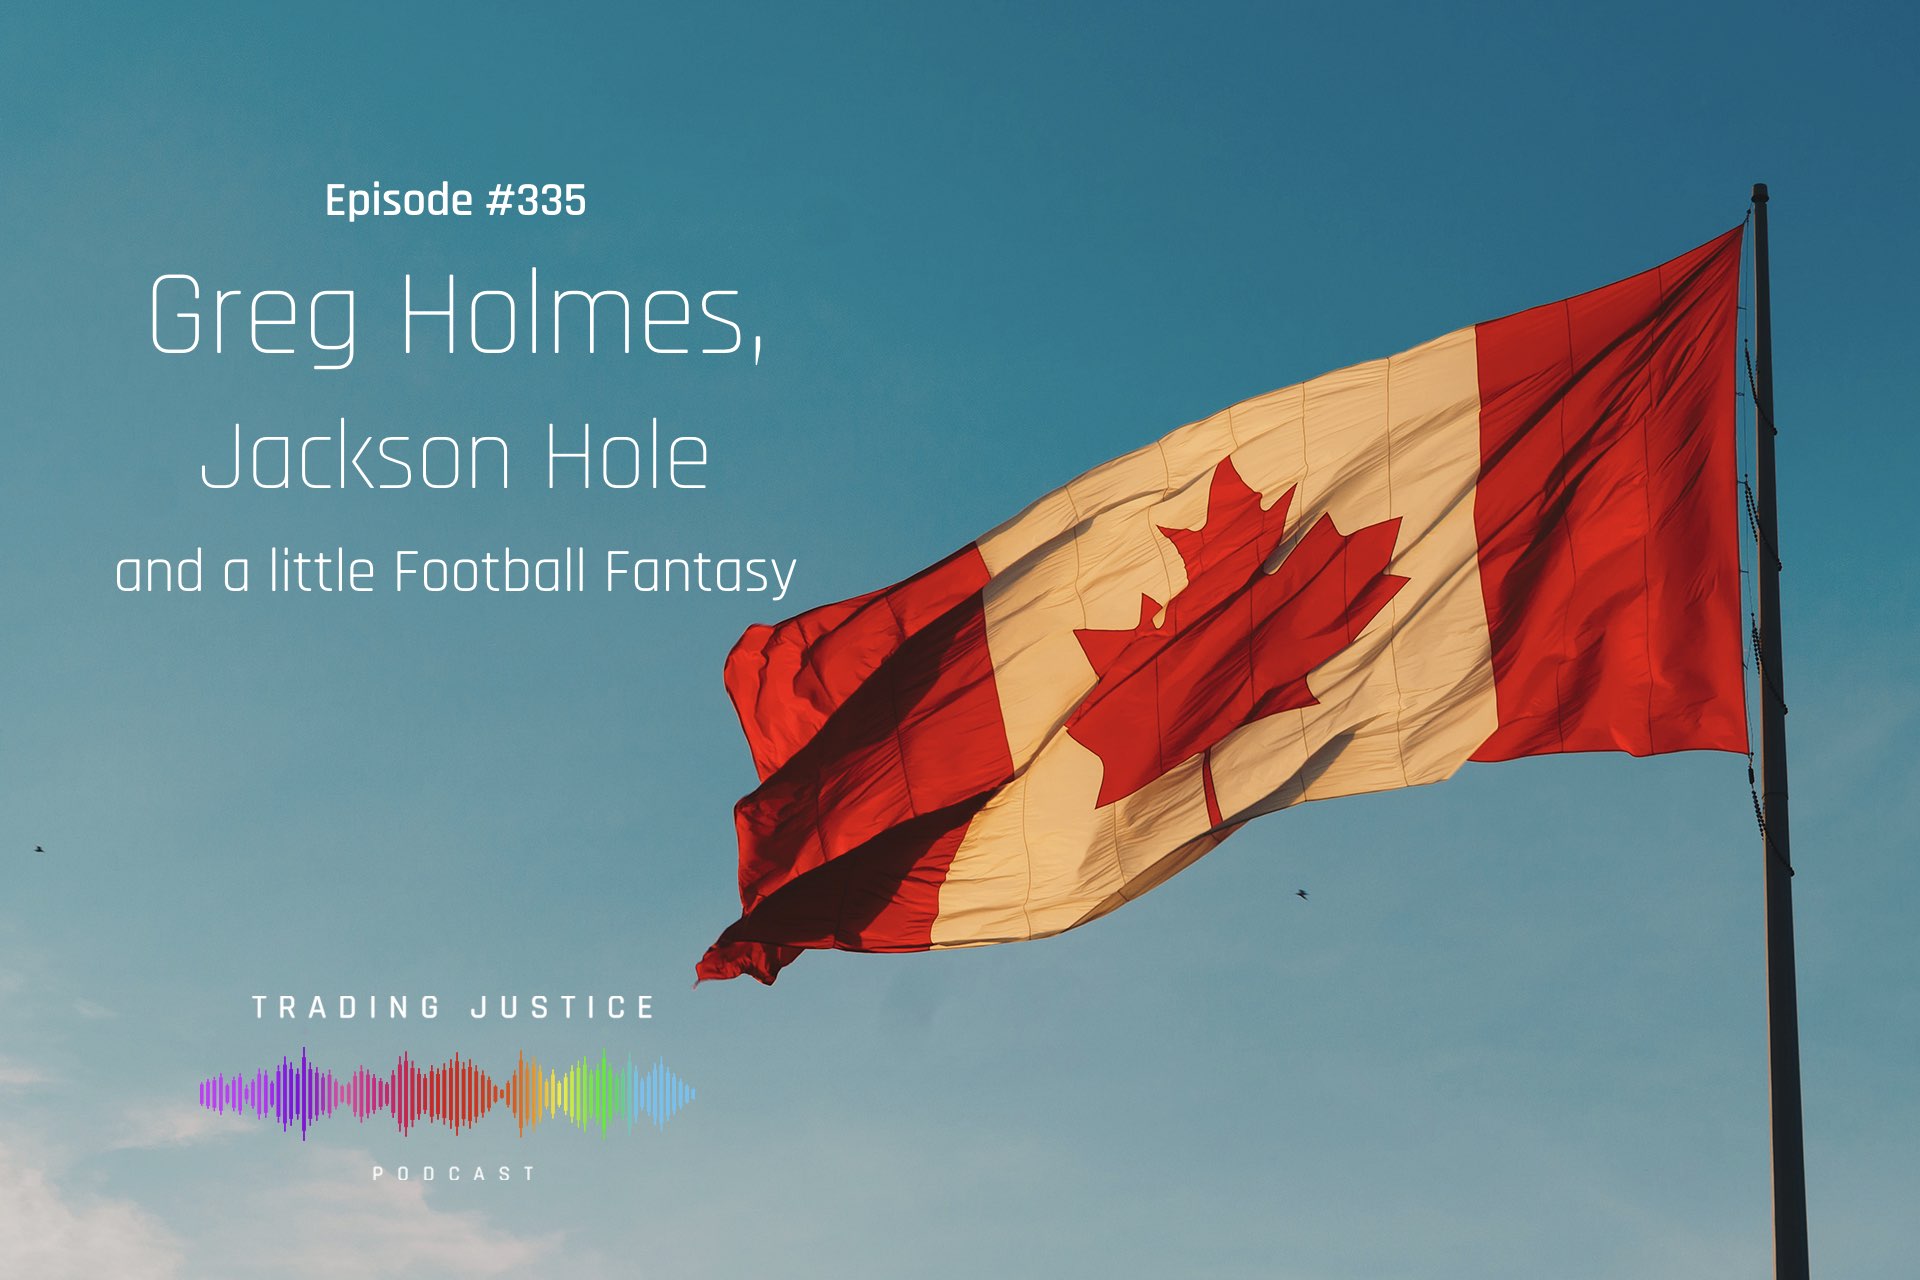 Episode 335: Greg Holmes, Jackson Hole, and a little Fantasy Football | Trading Justice Podcast